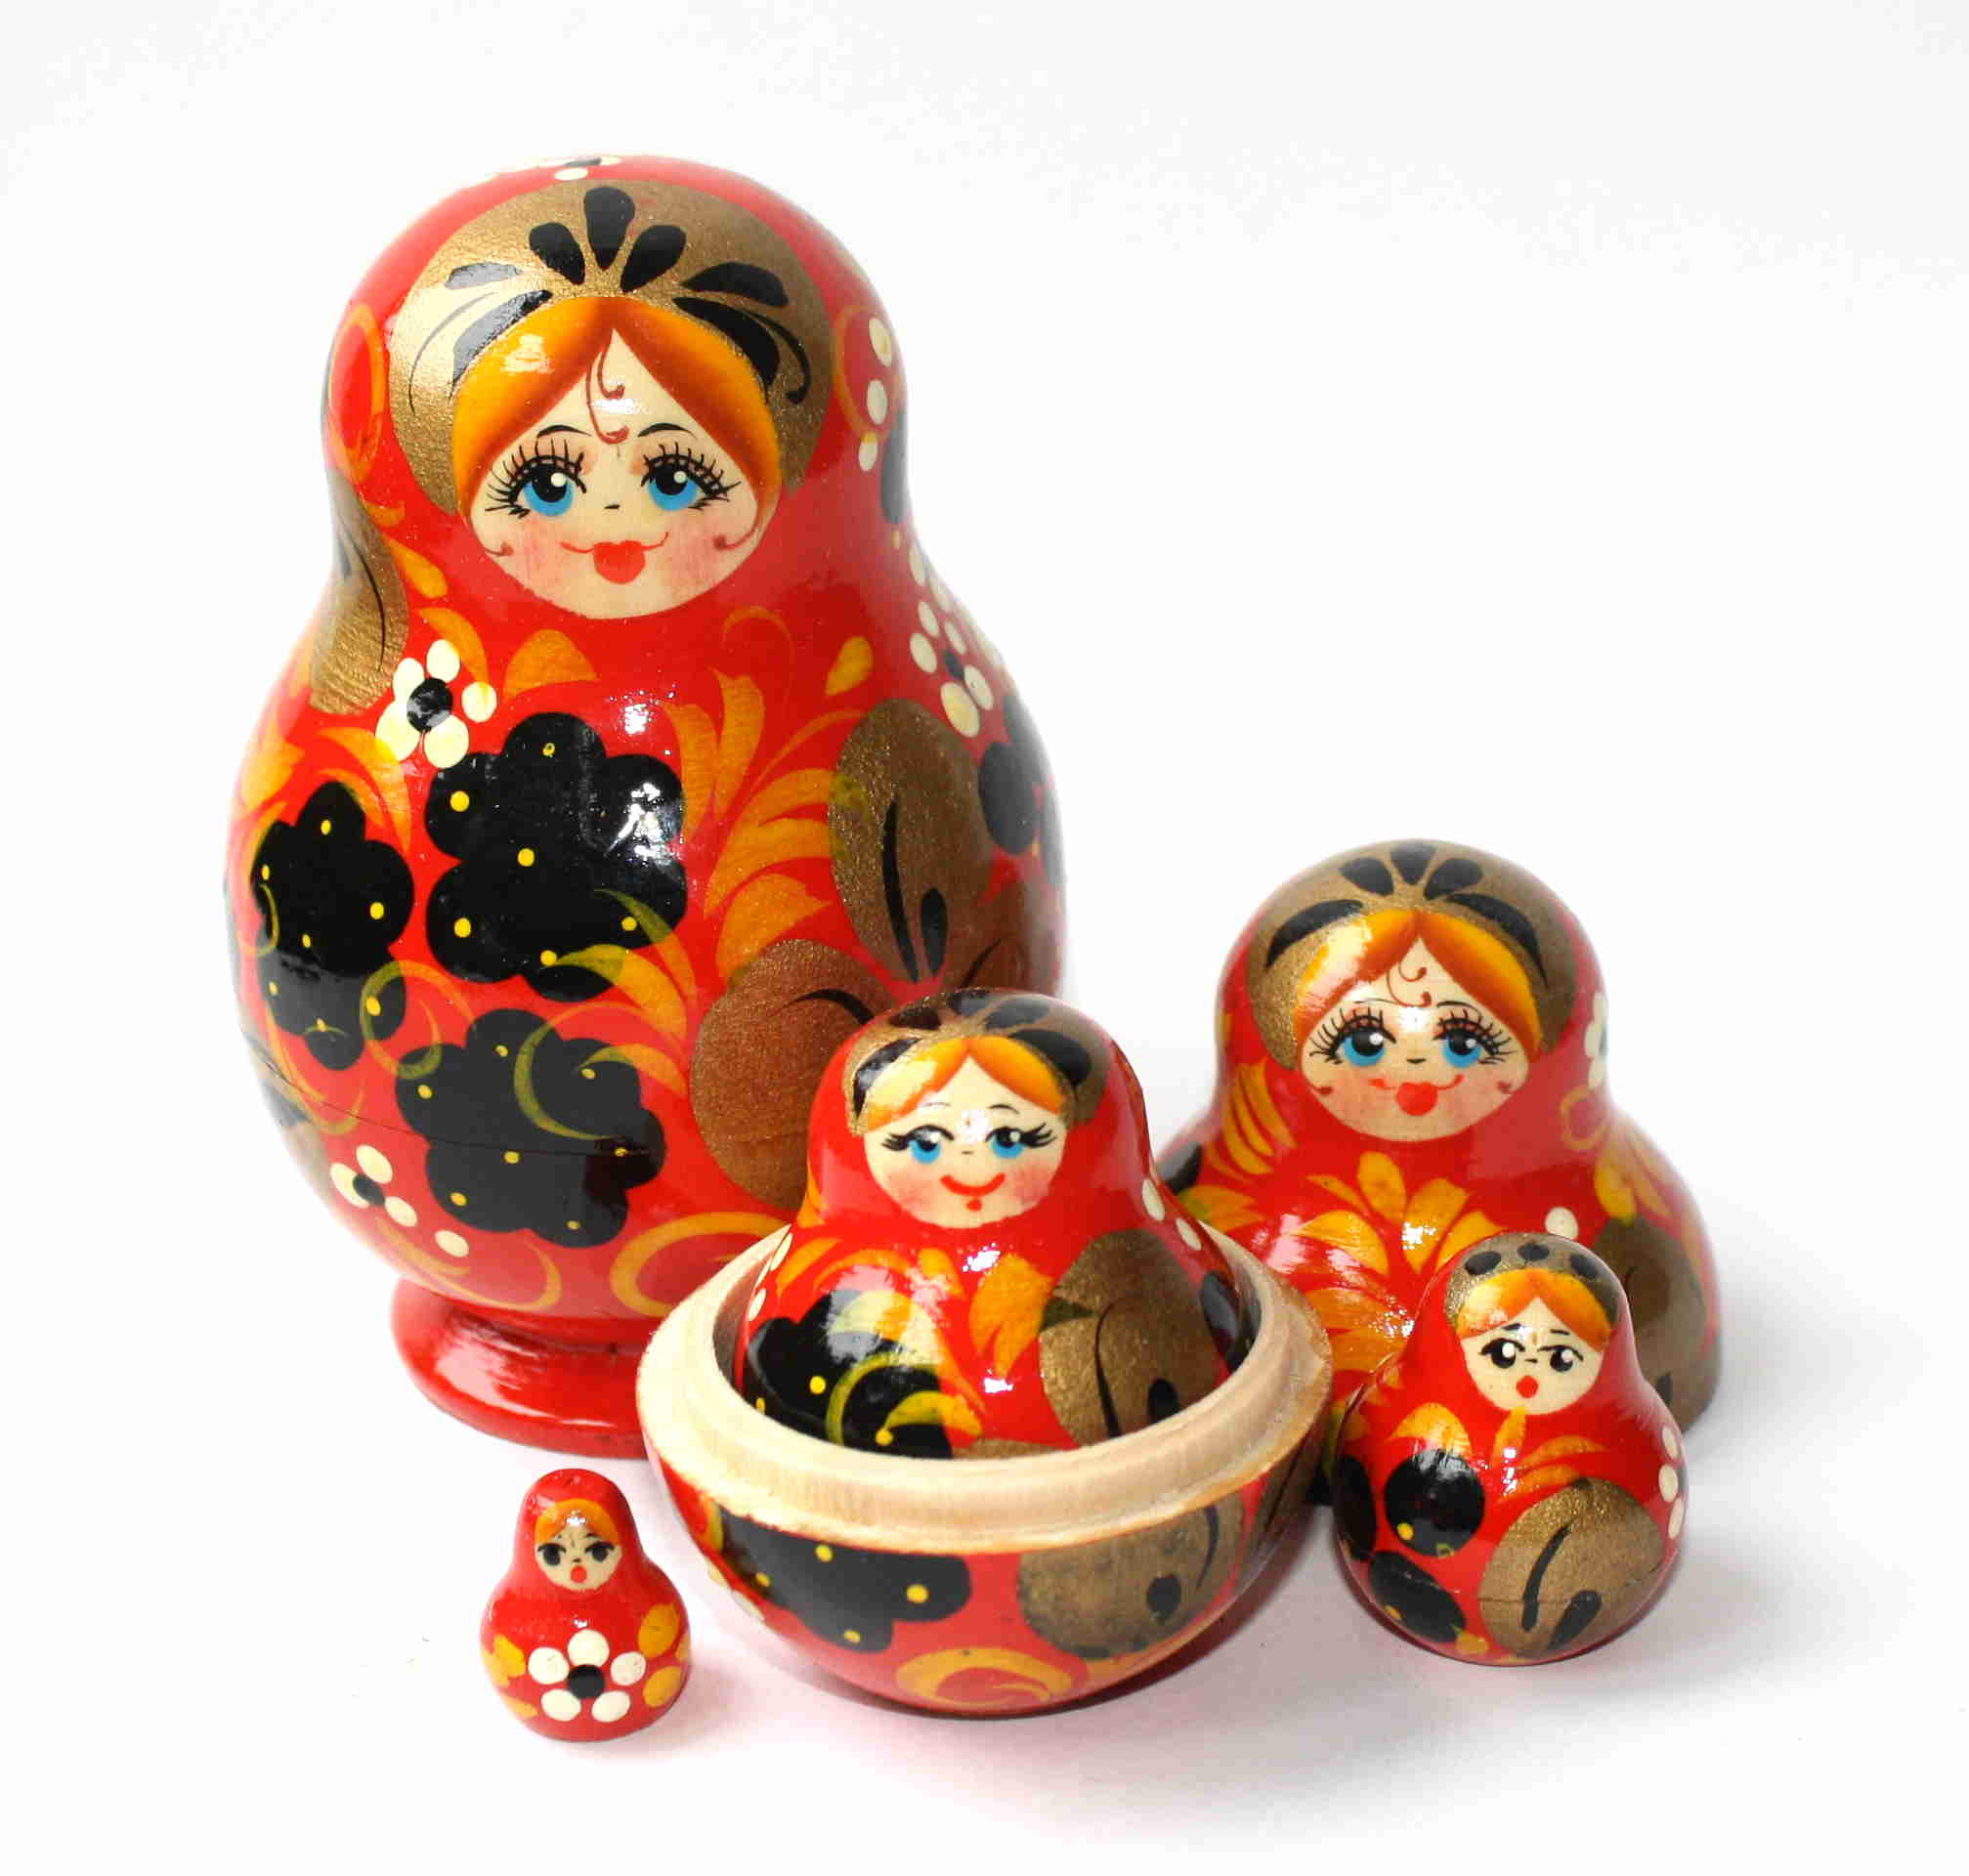 Artists Matryoshka Red with black berries with yellow & gold leaves (5 nested set)